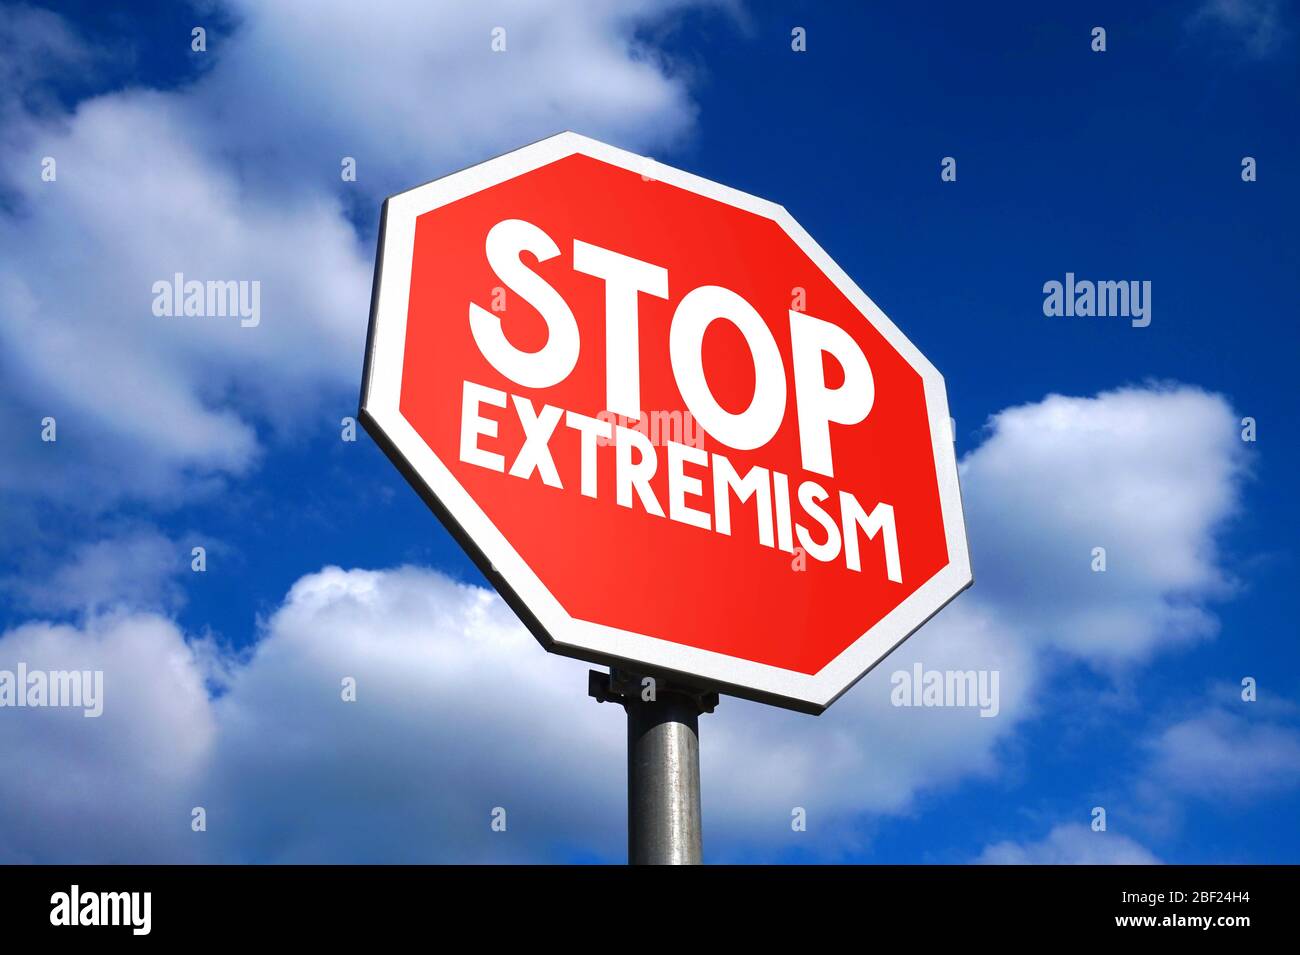 Stop extremism sign Stock Photo